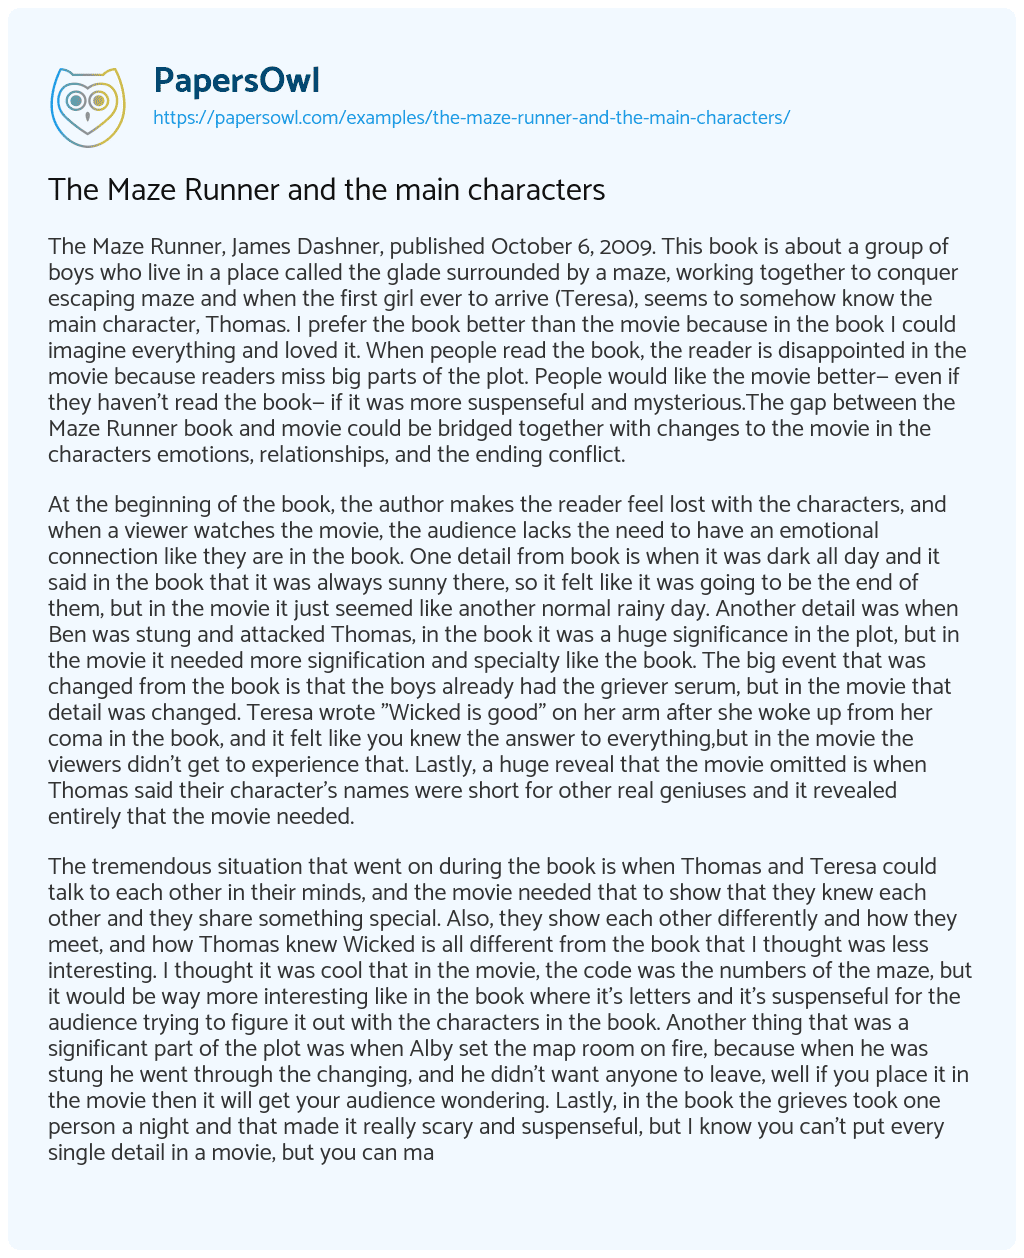 The Maze Runner and the Main Characters essay